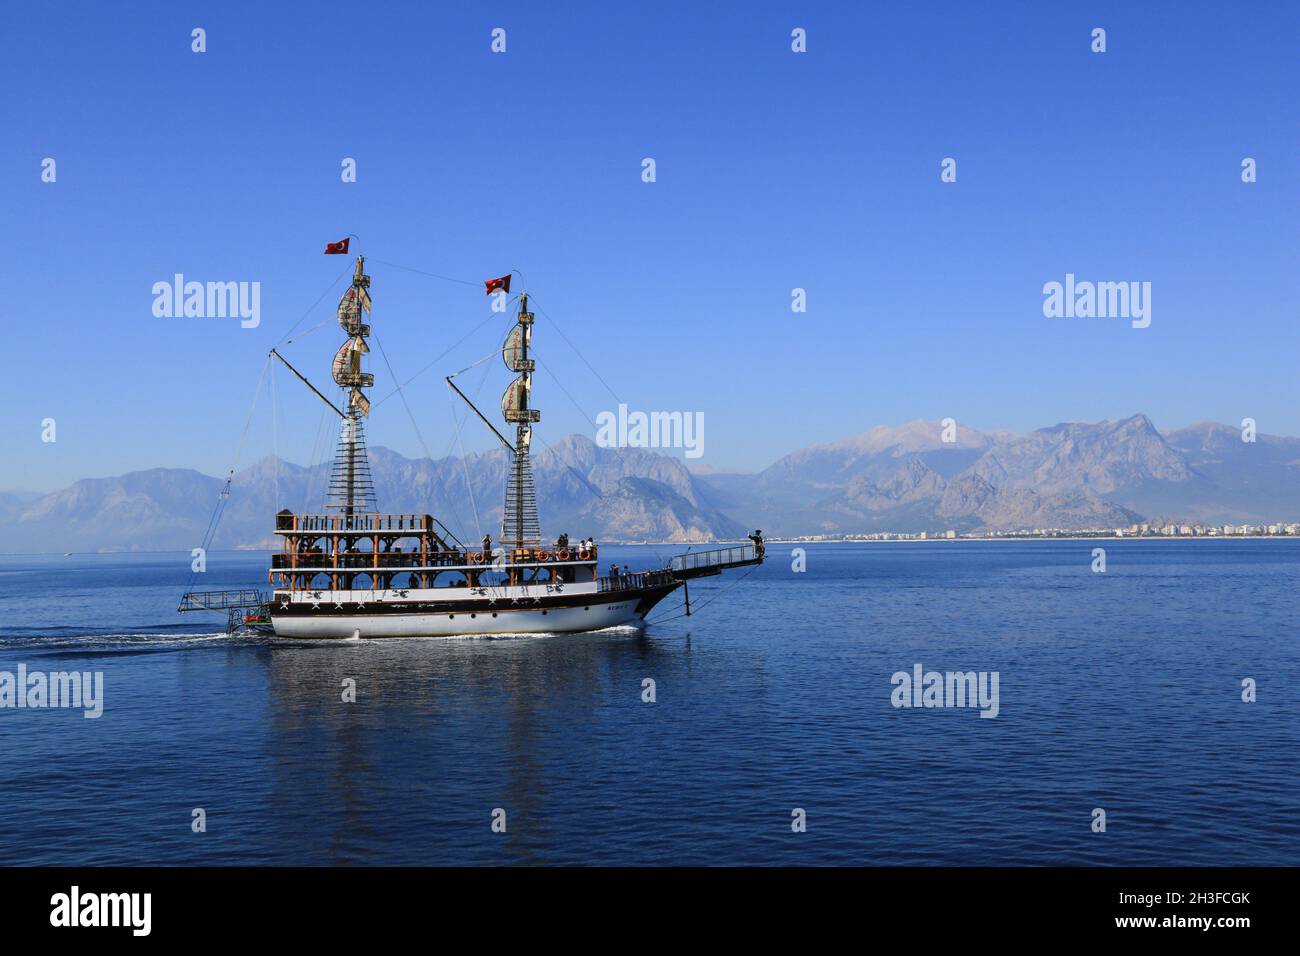 The schooner Kurt C is heading northwest along the Antalya coast in southern Turkey with a group of tourists on this pirate replica boat. Stock Photo